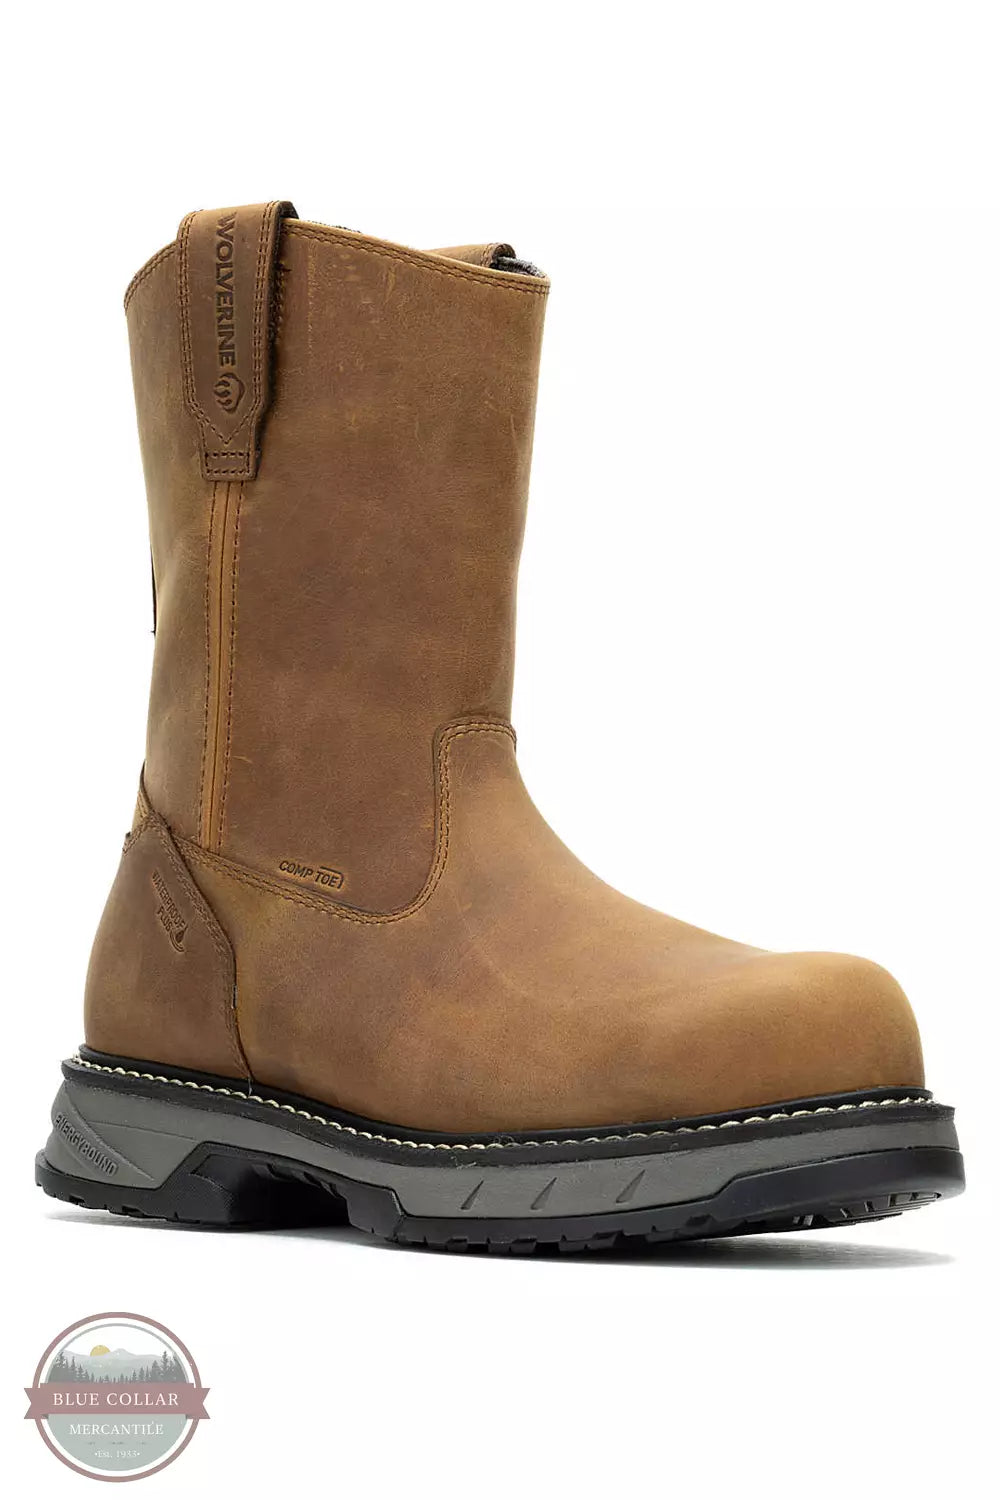 Wolverine W241027 ReForce EnergyBound CarbonMax Work Wellingtons Profile View